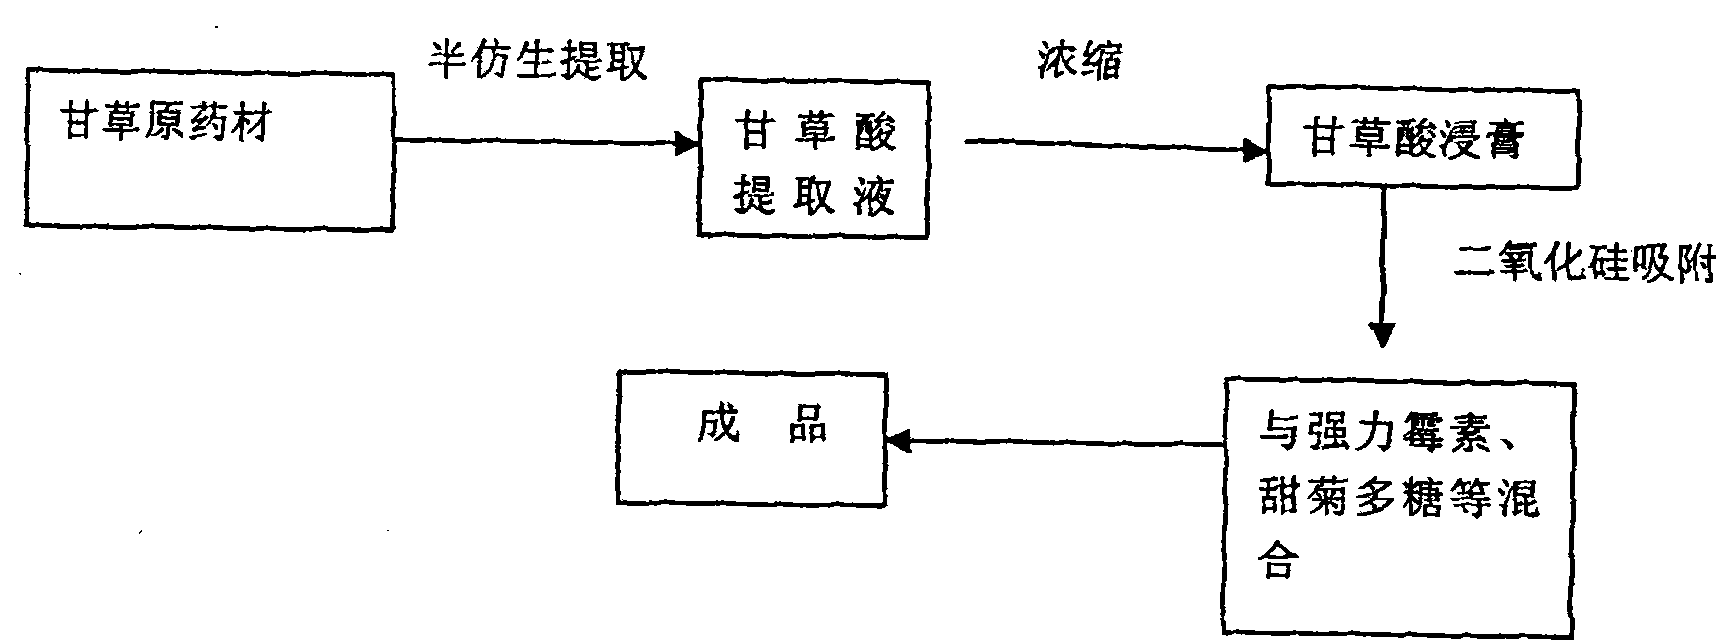 Method for producing Chinese-western compound preparation for preventing and treating animal synthetic respiratory diseases